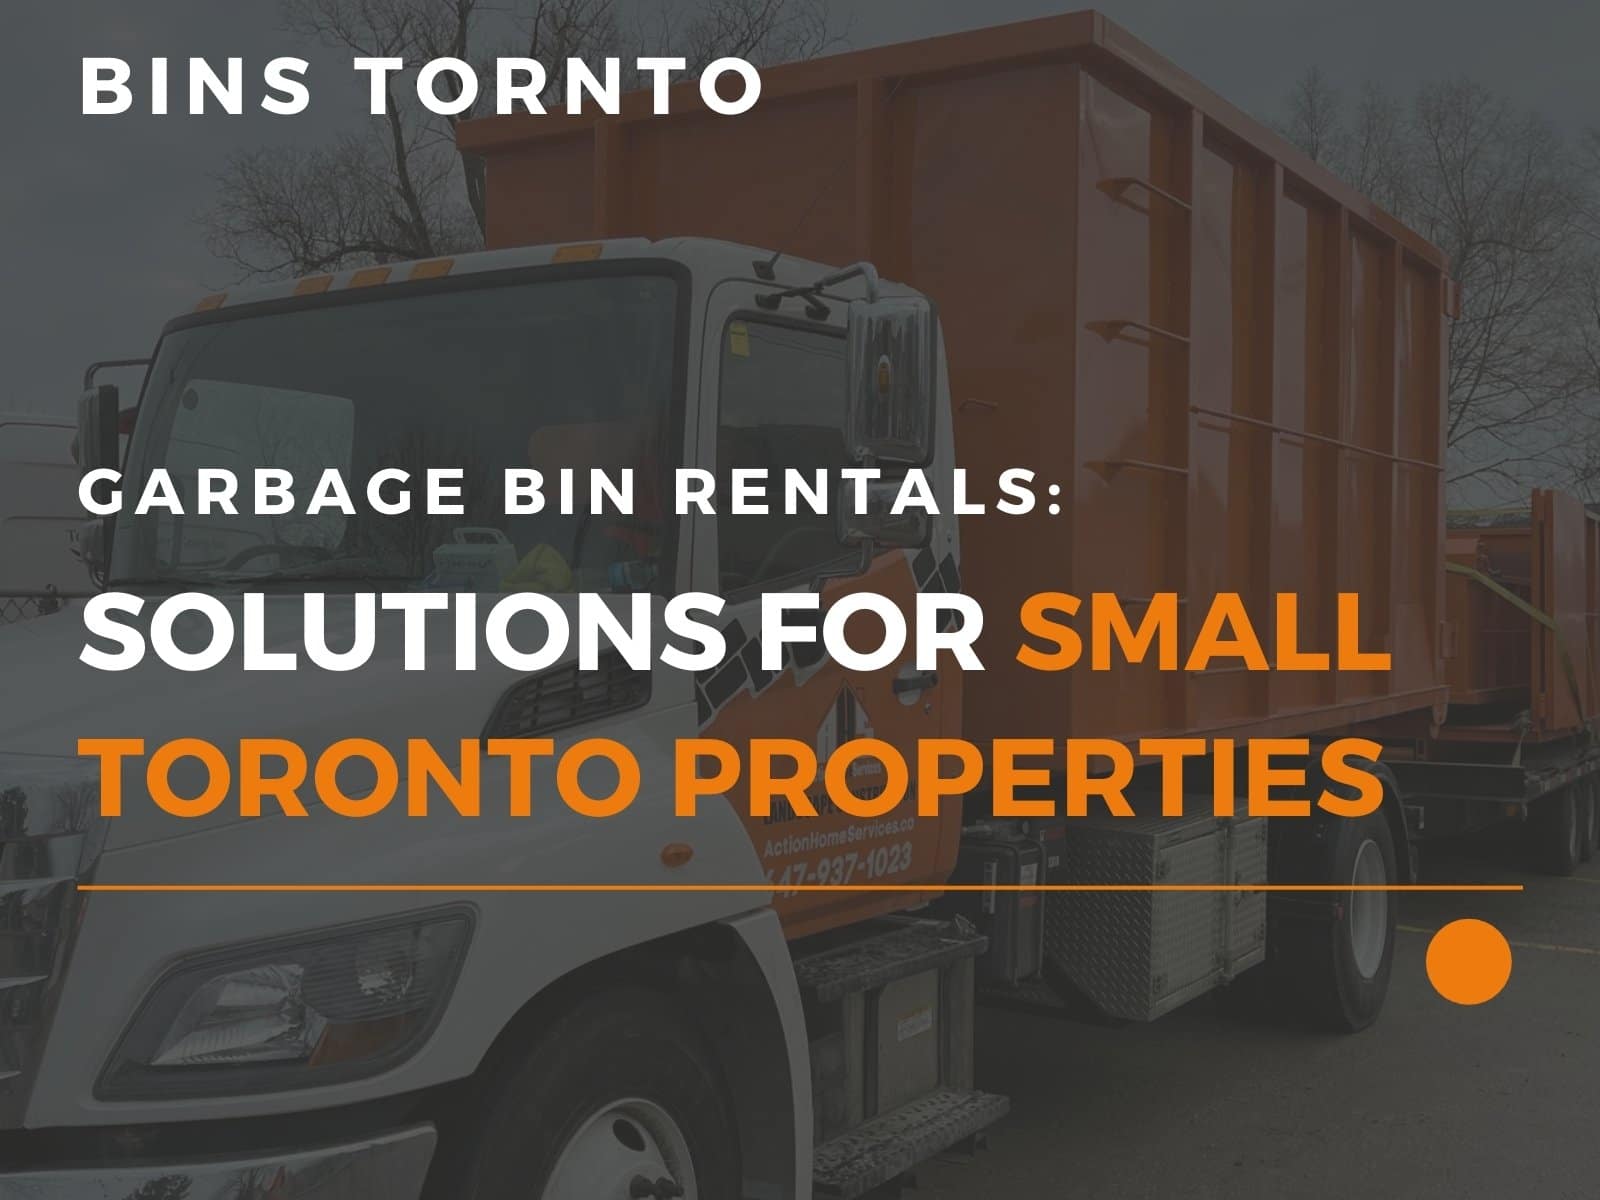 Image depicts the featured image for the blog article Garbage Bin Rentals: Solutions For Small Toronto Properties, which shows a rental bin from Bins Toronto.